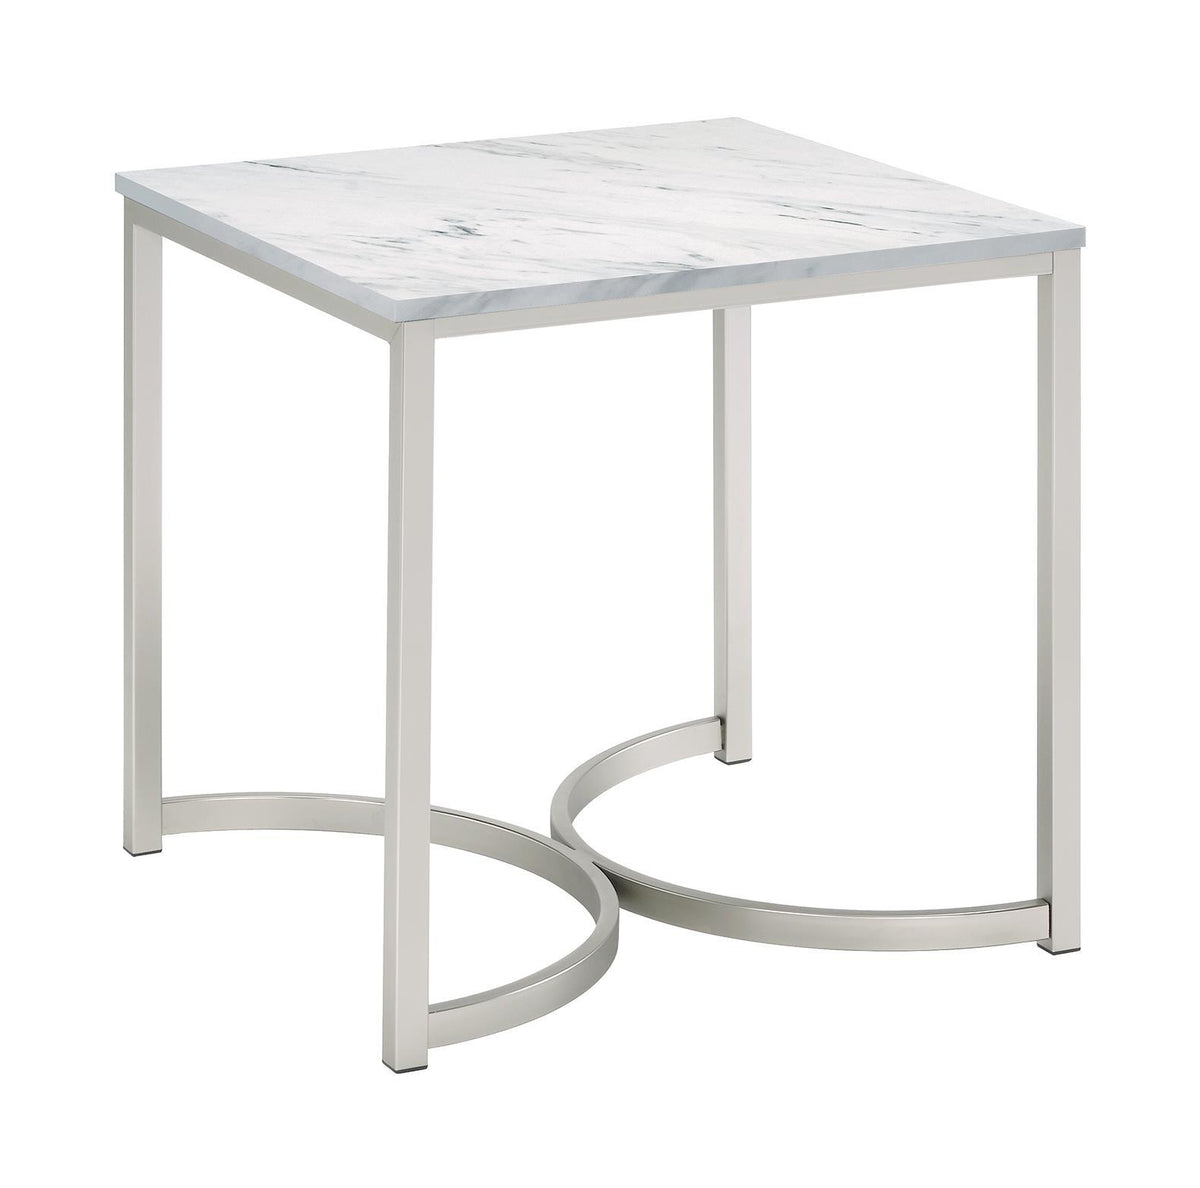 Leona Faux Marble Square End Table White and Satin Nickel Leona Faux Marble Square End Table White and Satin Nickel Half Price Furniture